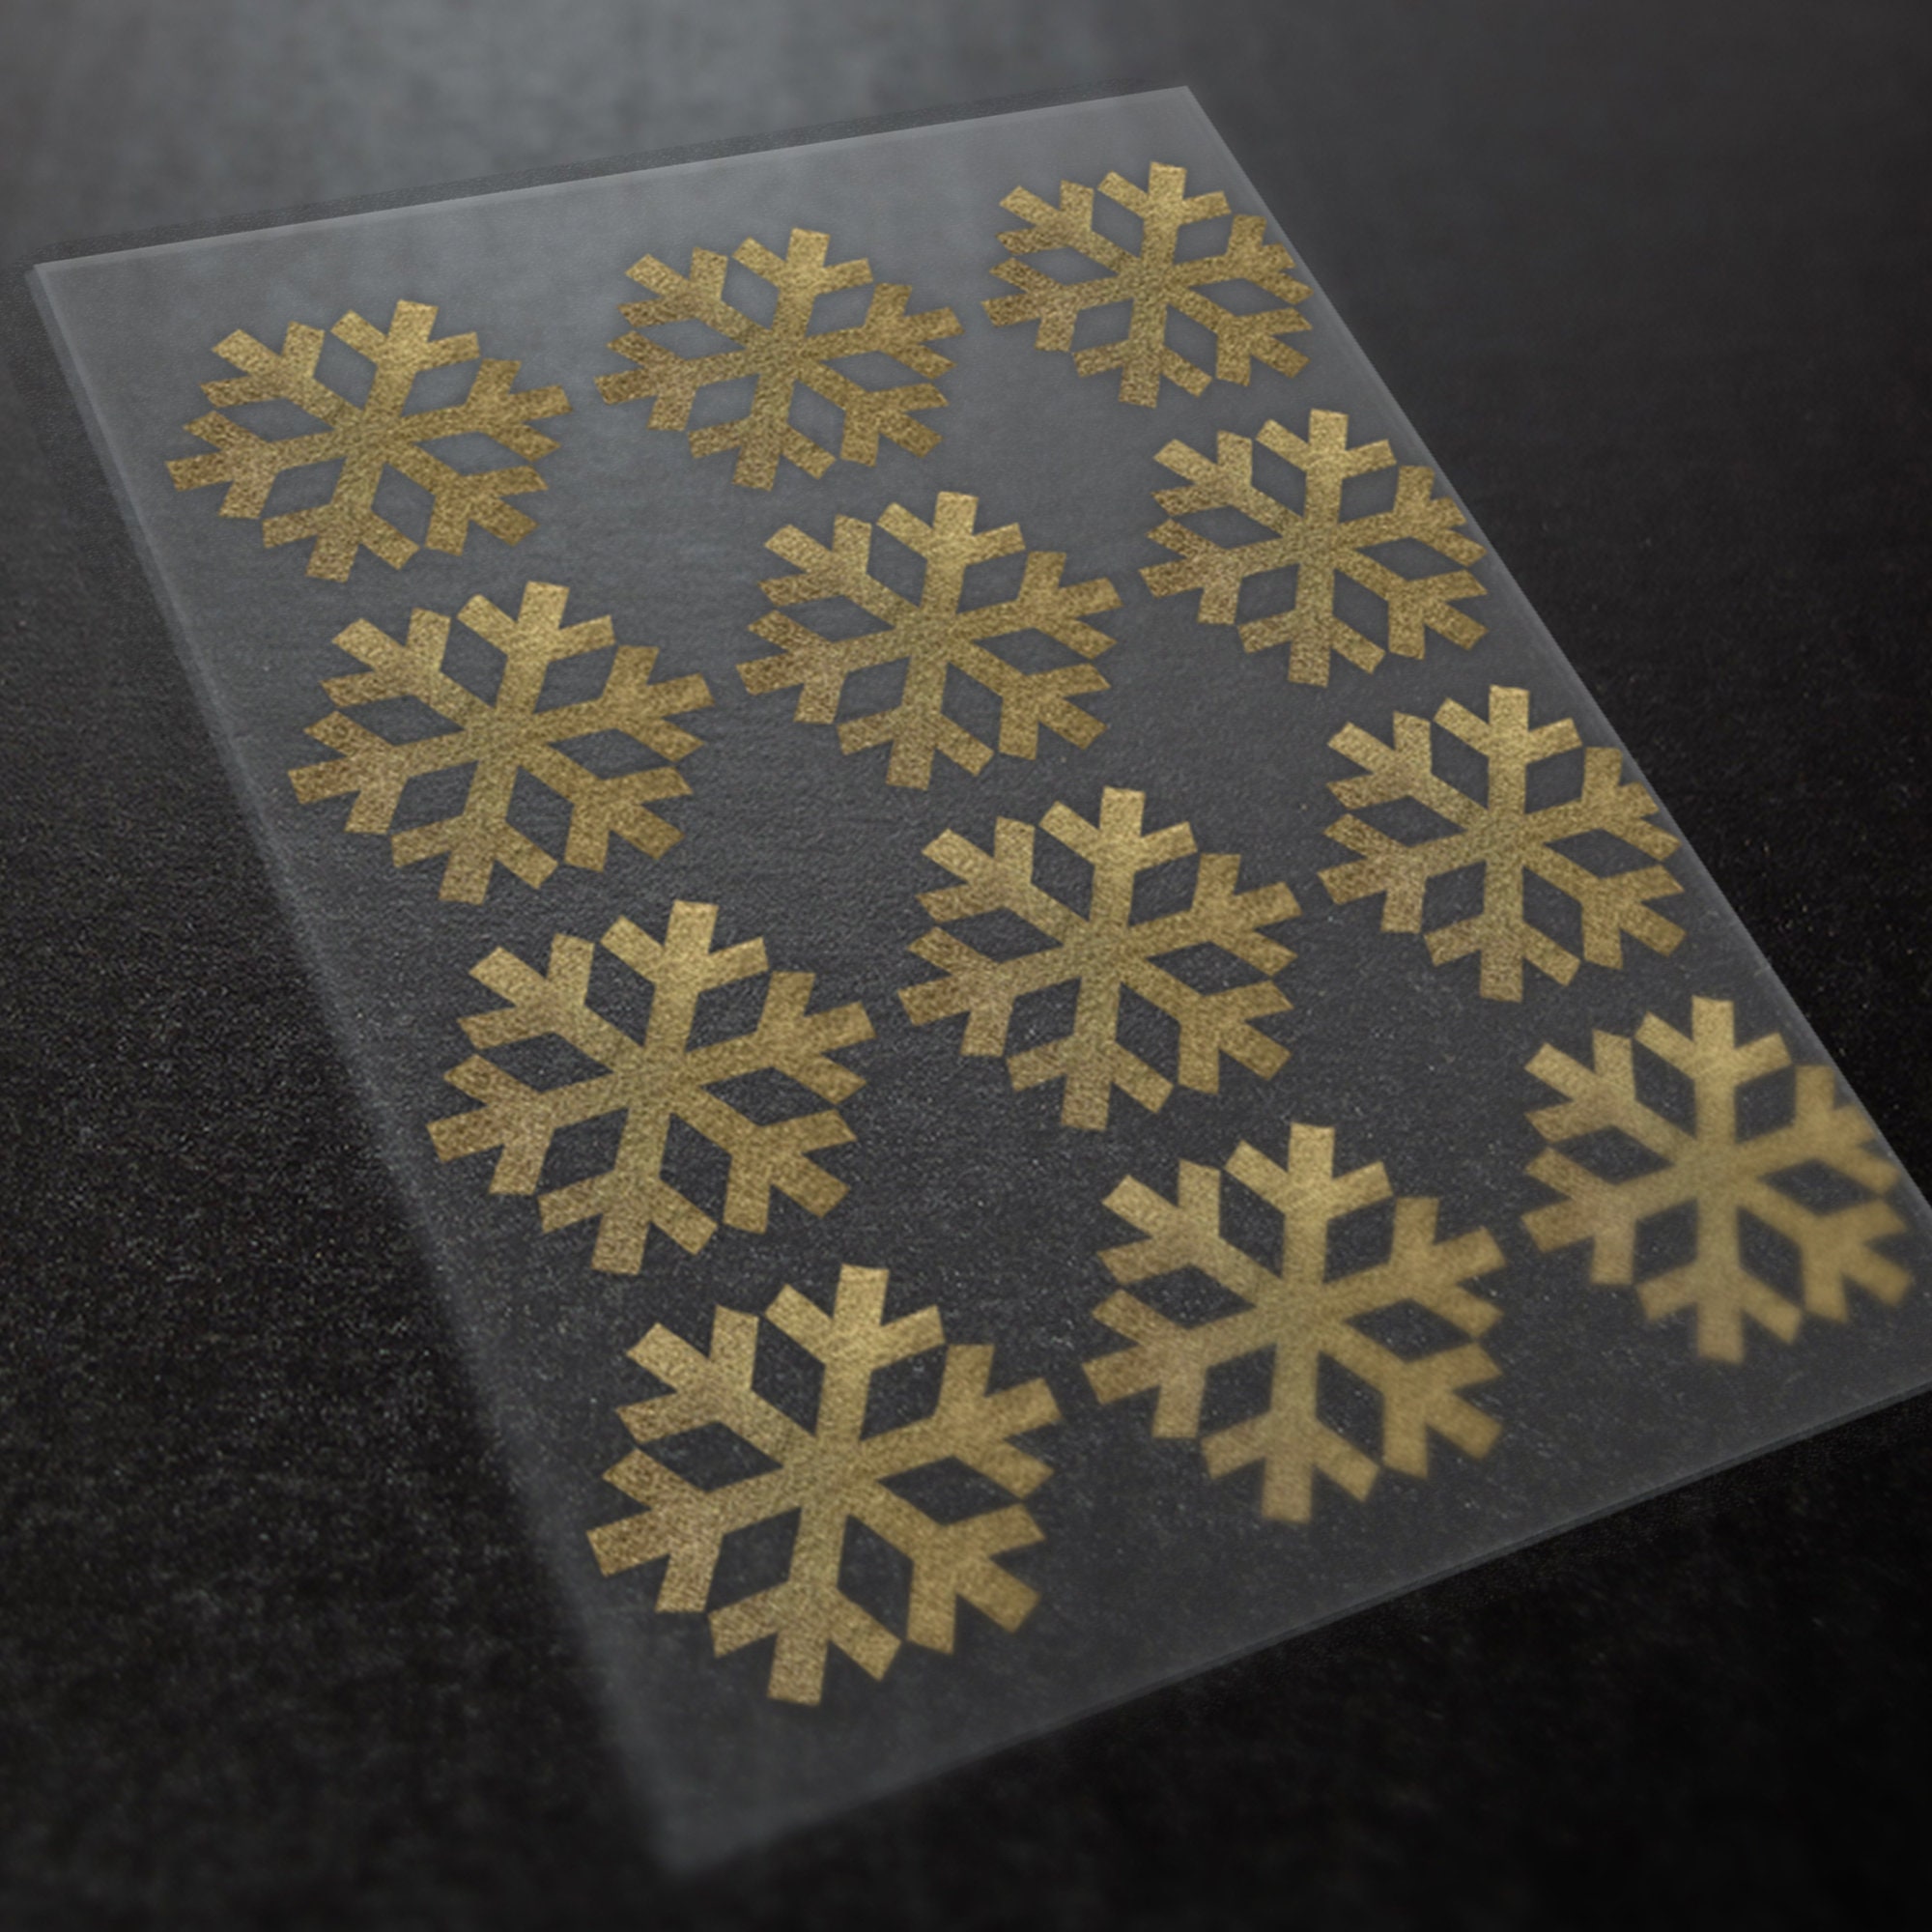 Silver Snowflakes Patches, Metallic Sparkly Iron on Embellishments for  Christmas Winter Crafts 